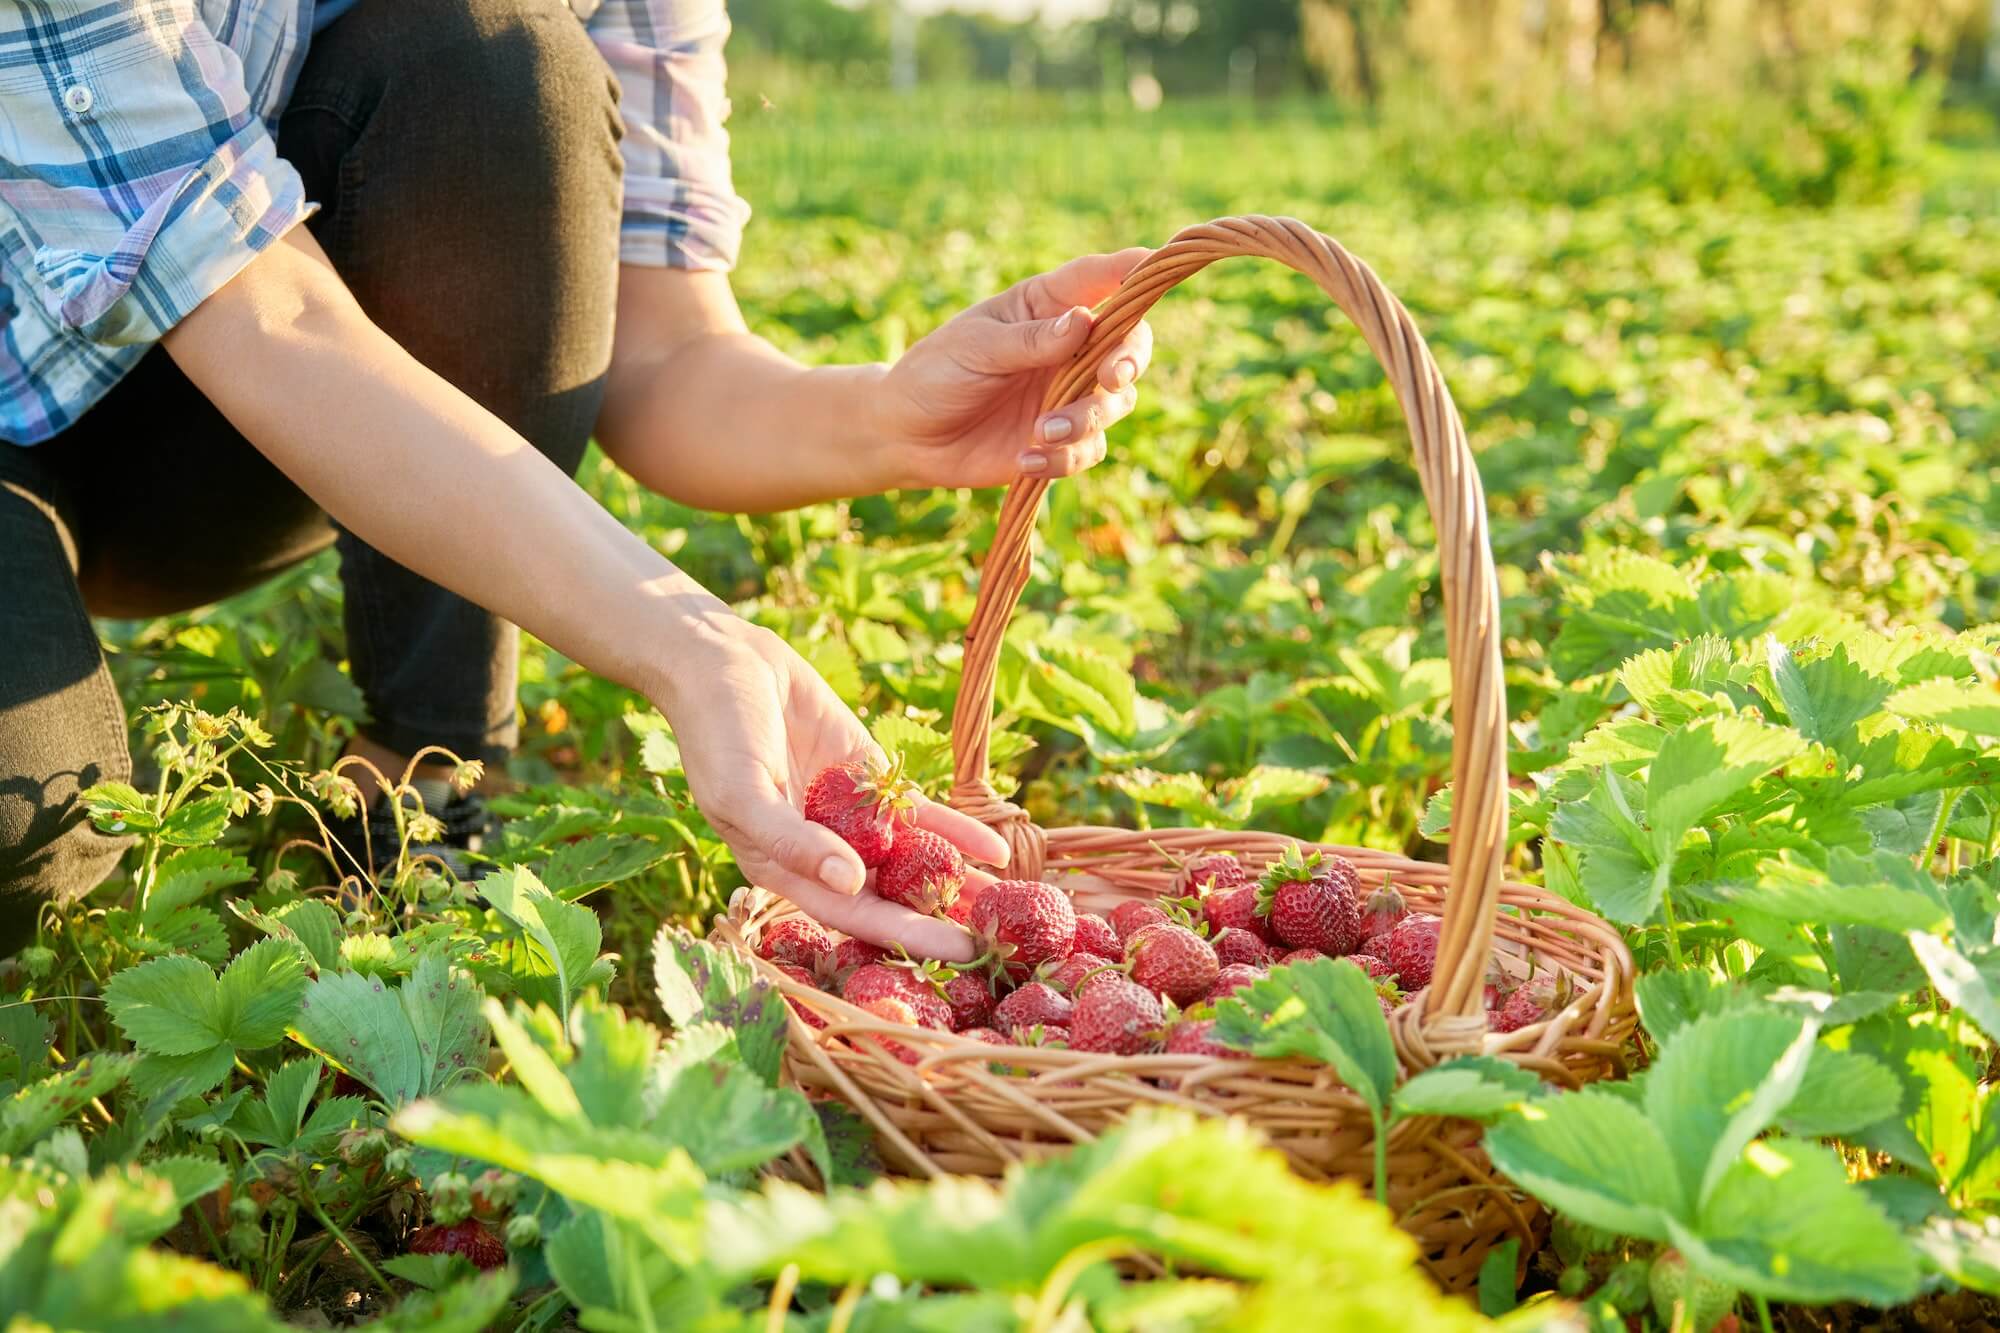 farm field with strawberries close up of a basket with berries and a woman 39 s hands